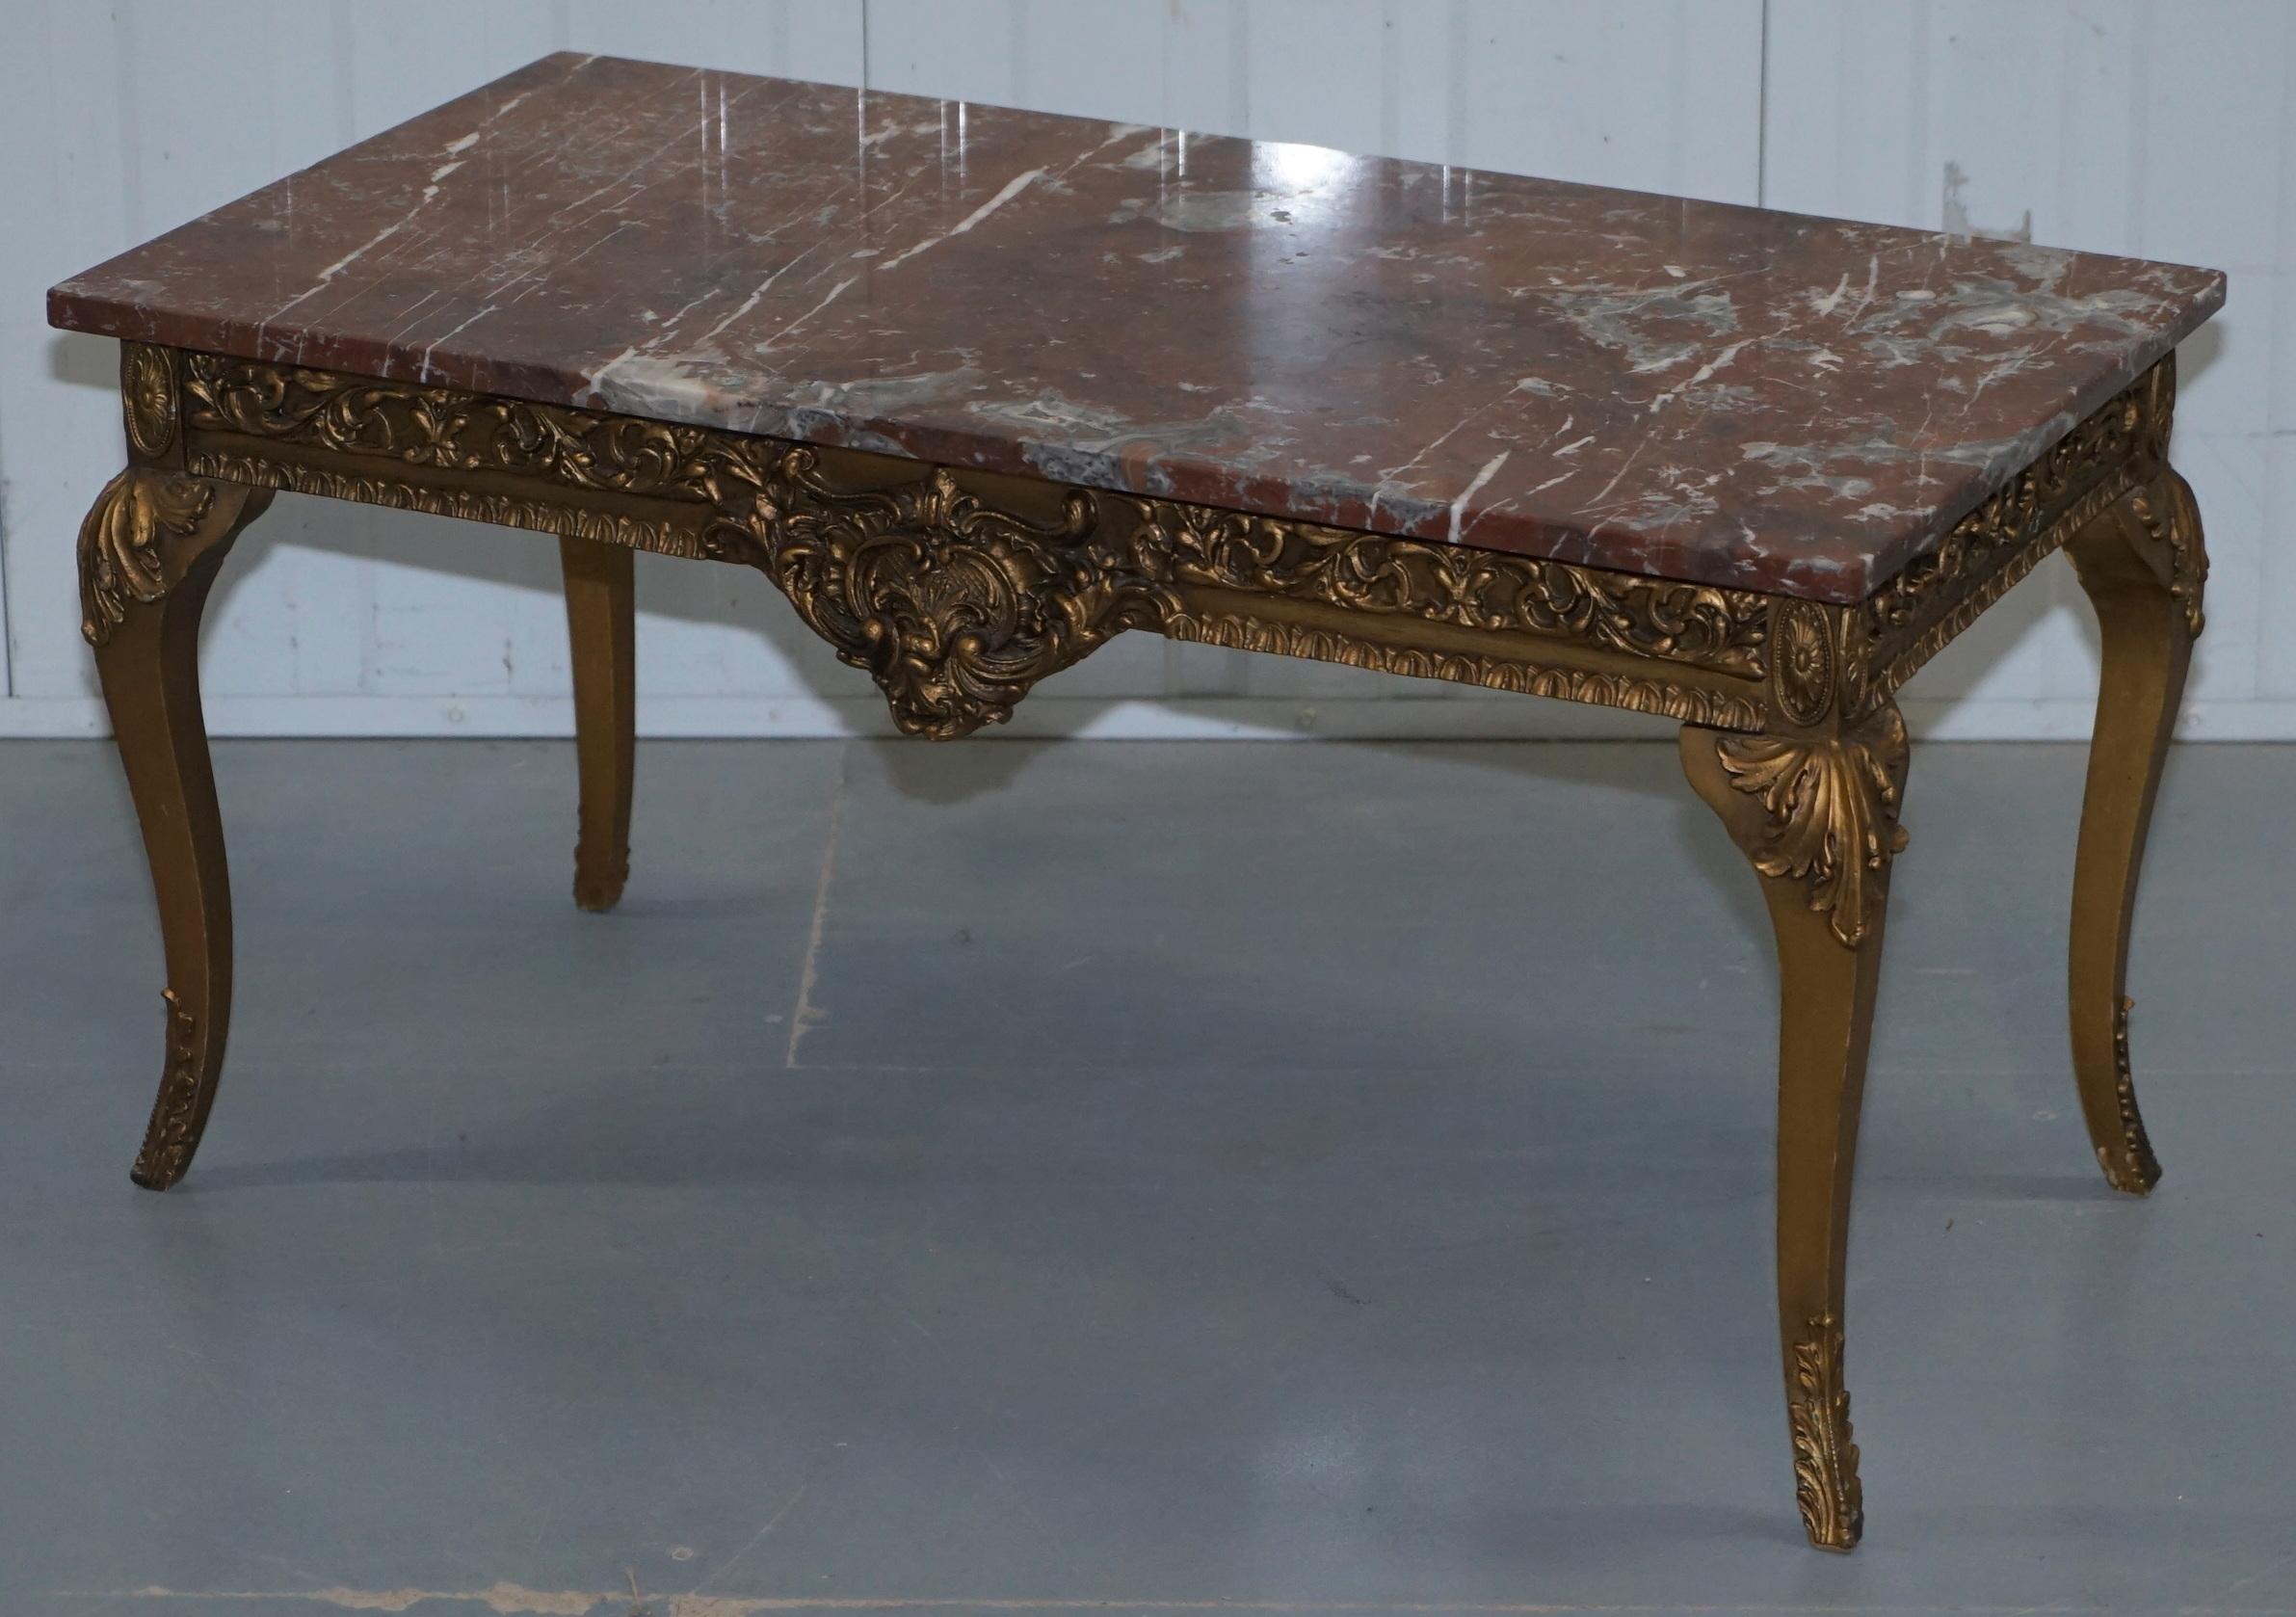 Hand-Crafted Rouge Marble Topped French Giltwood Coffee Table Heavy Rococo Baroque Carving